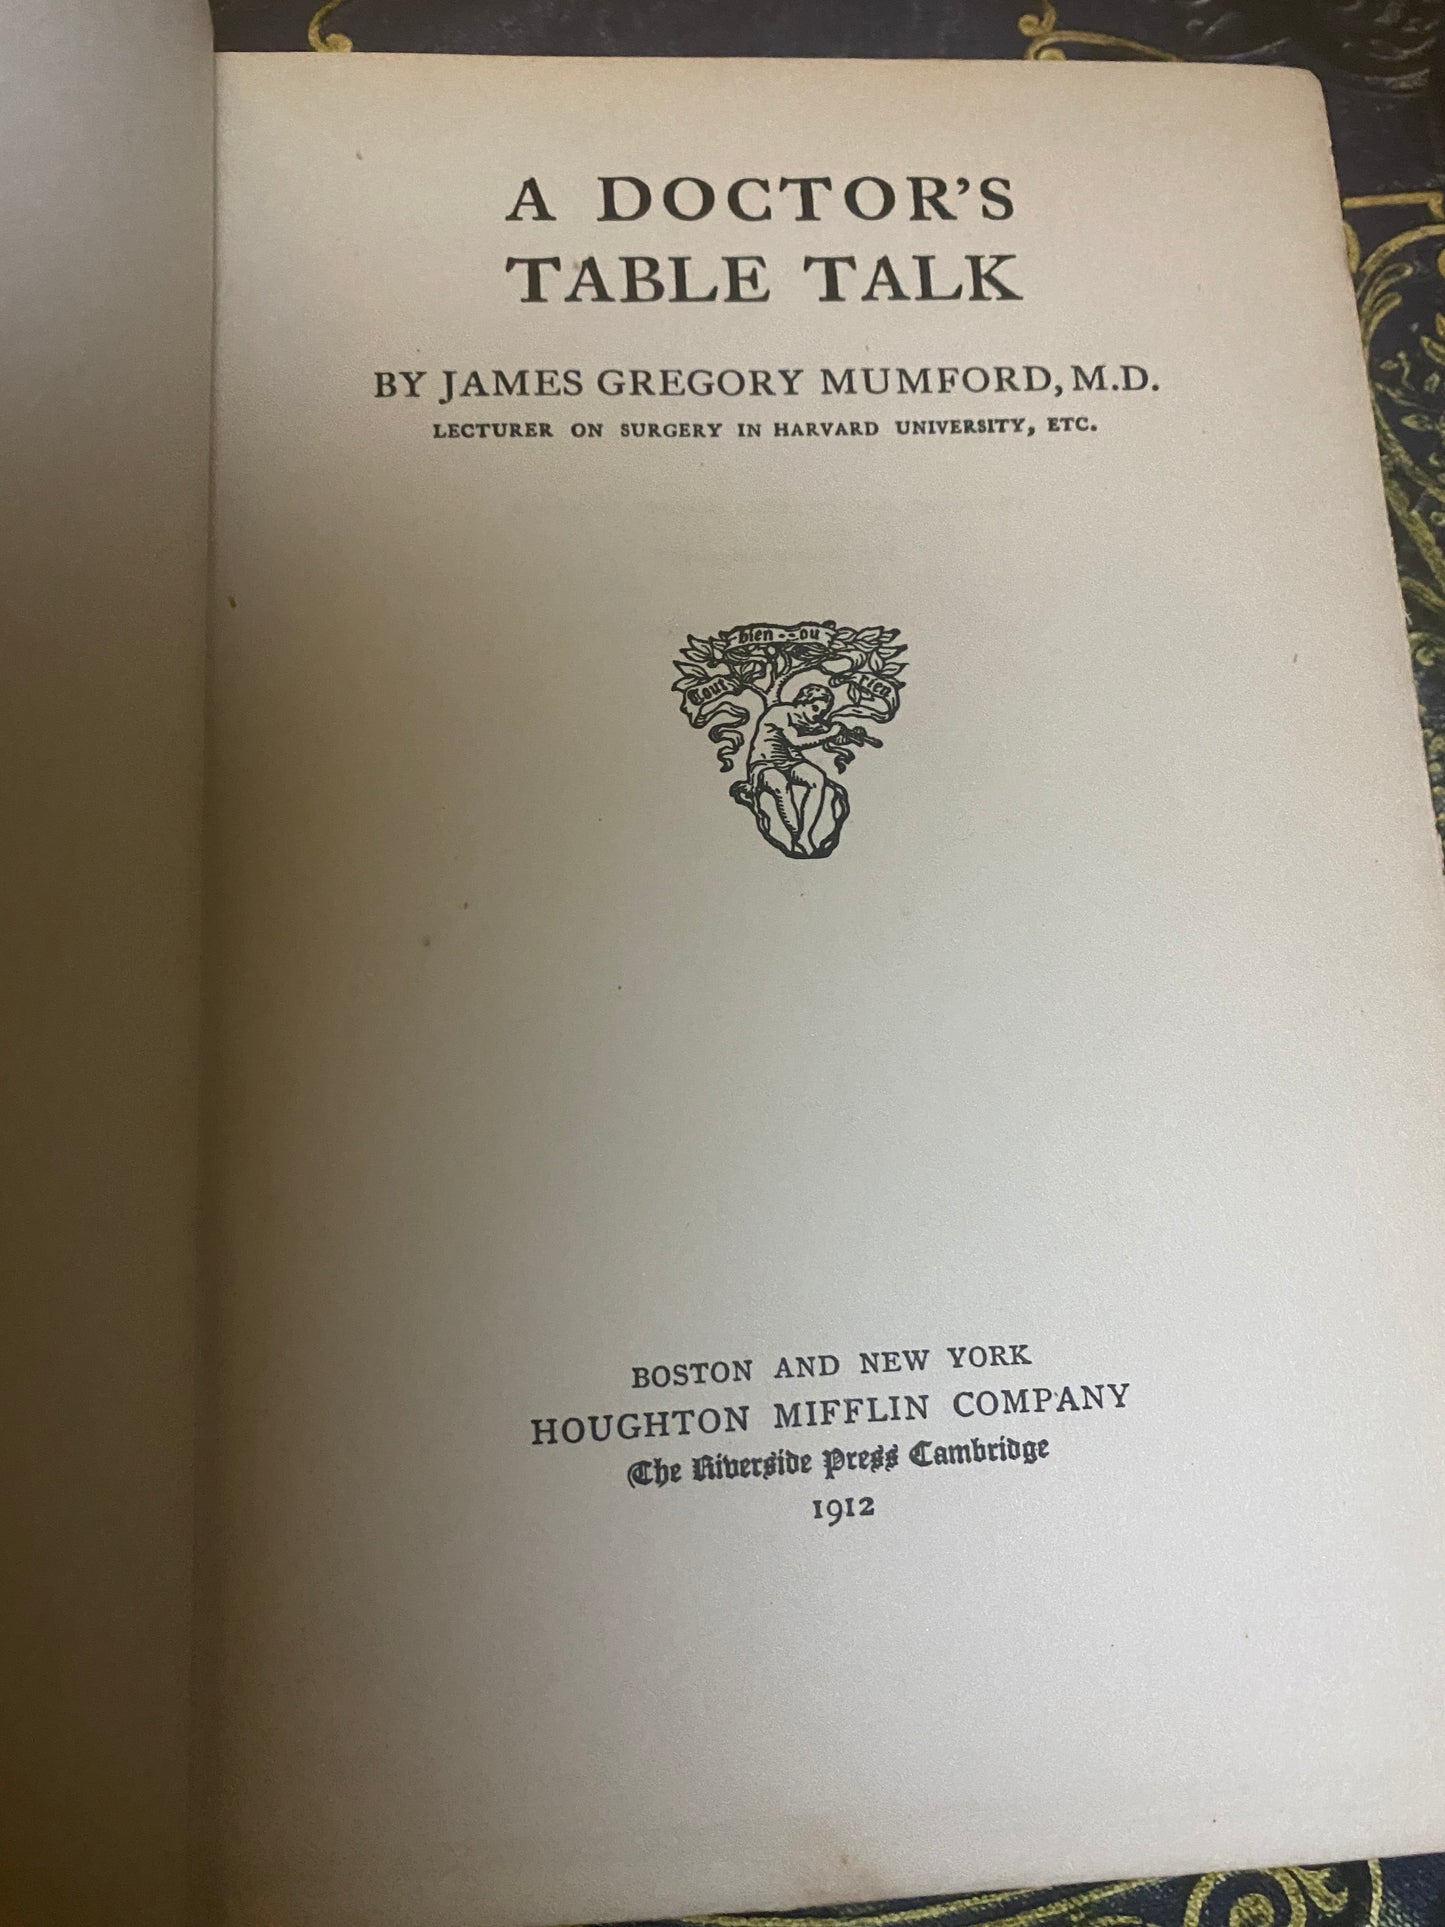 A Doctors Table Talk by James Gregory Mumford M.D., 1912 (First Edition)